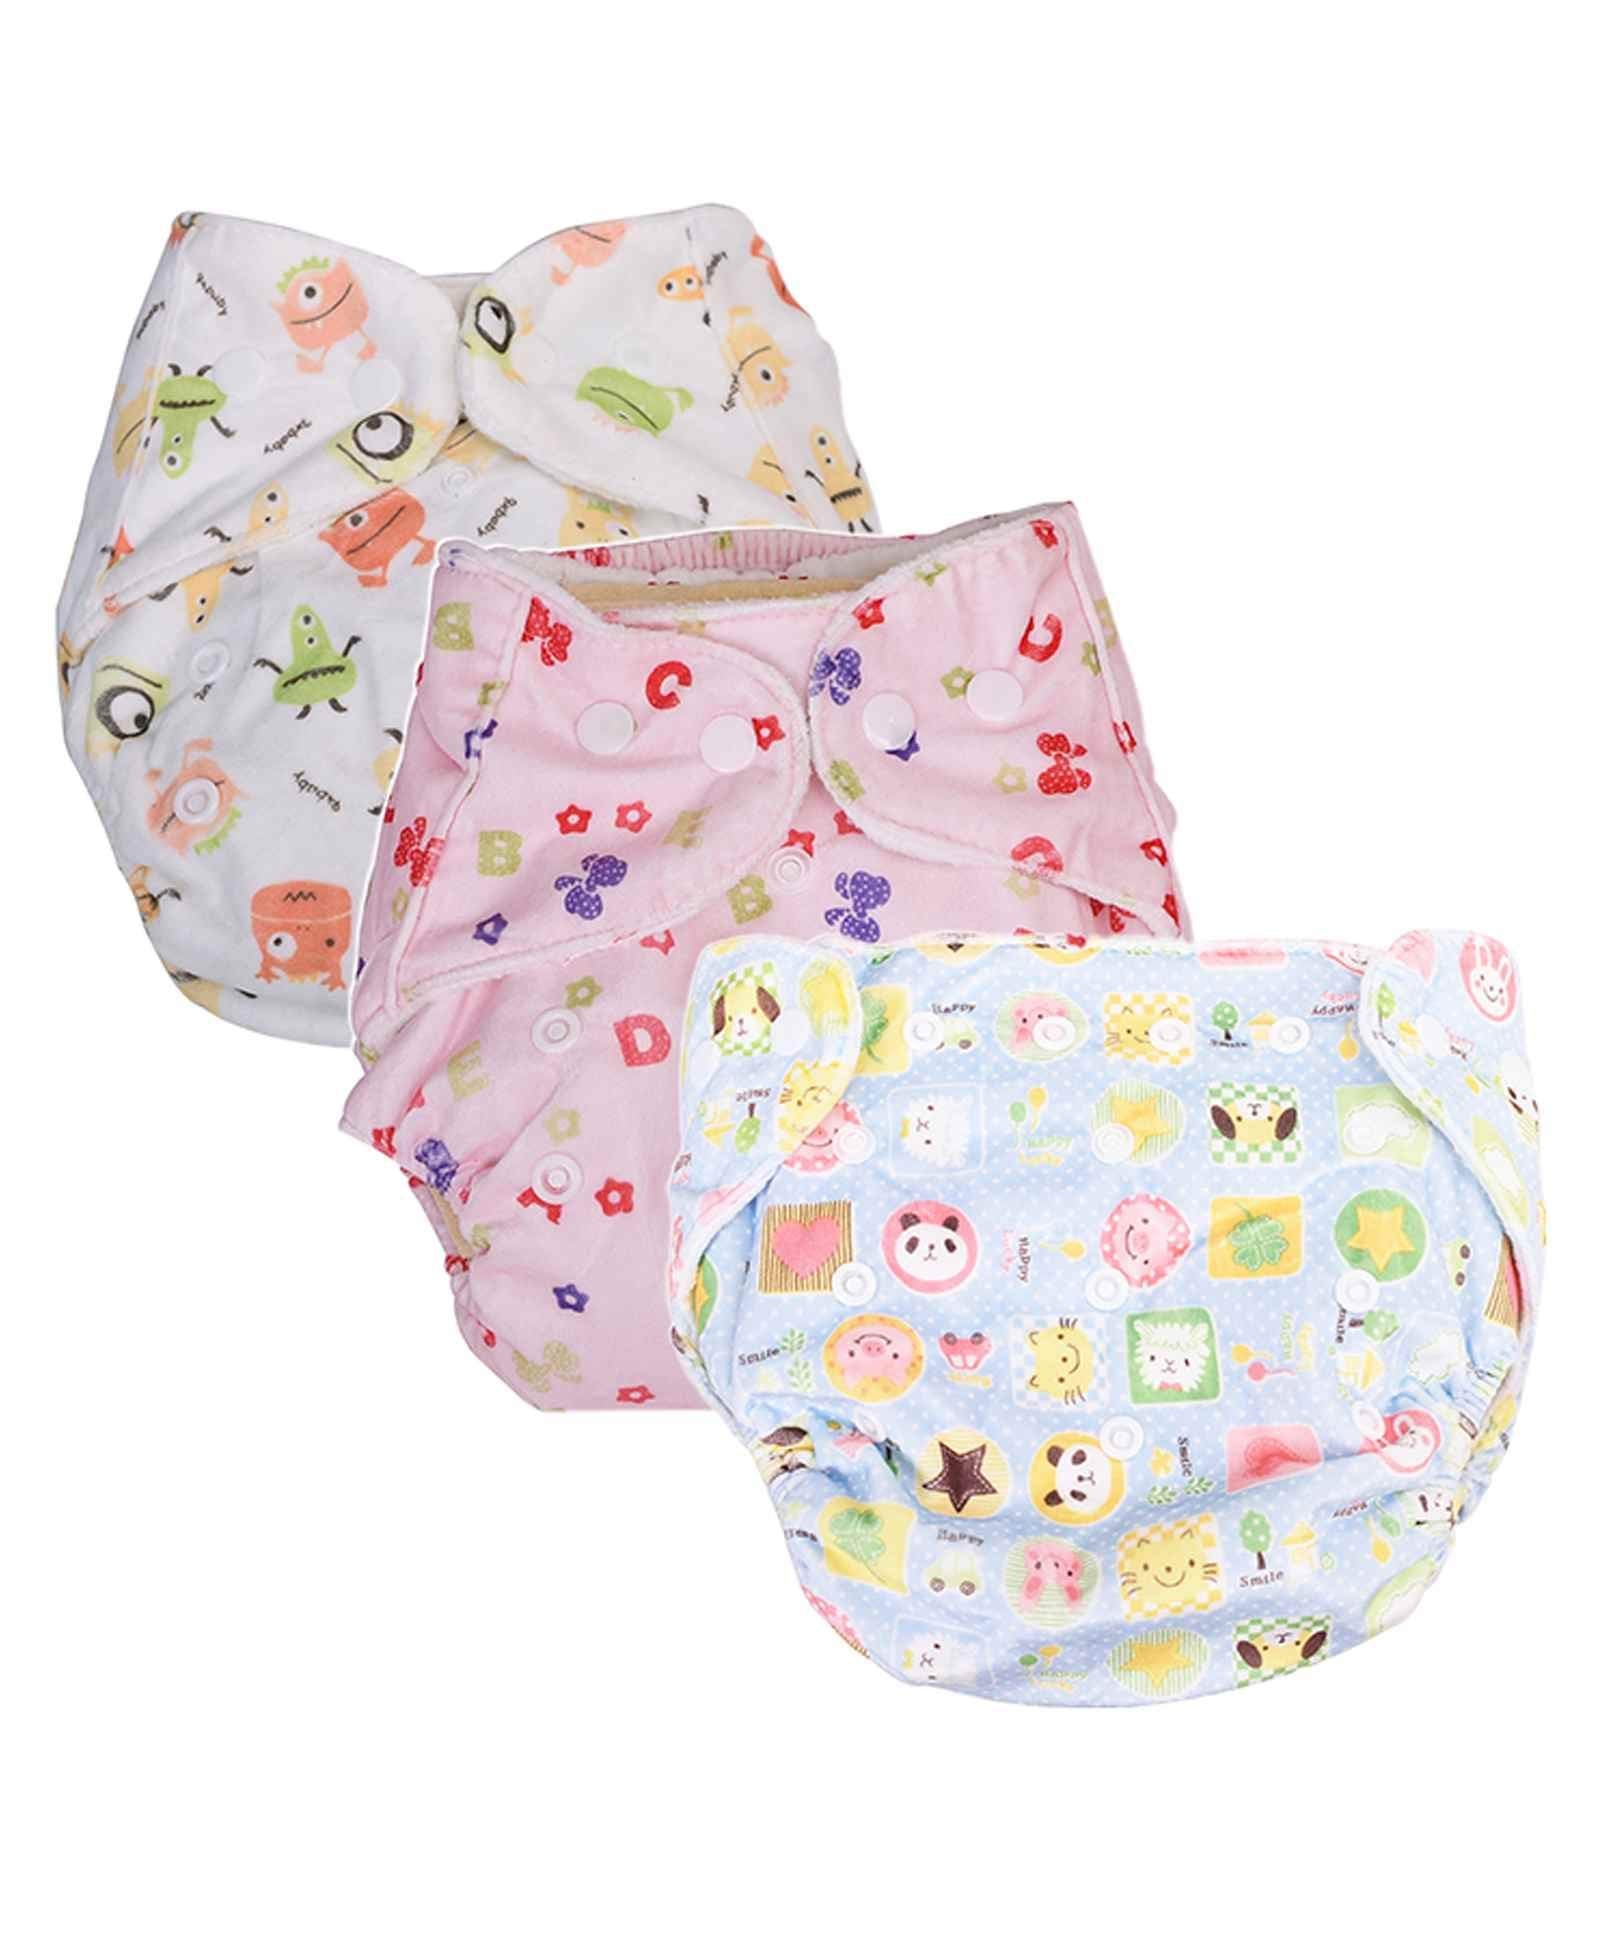 Baby Reusable Cotton Pocket Diapers- Pack of 3 and 3 Inserts - Size Ad ...